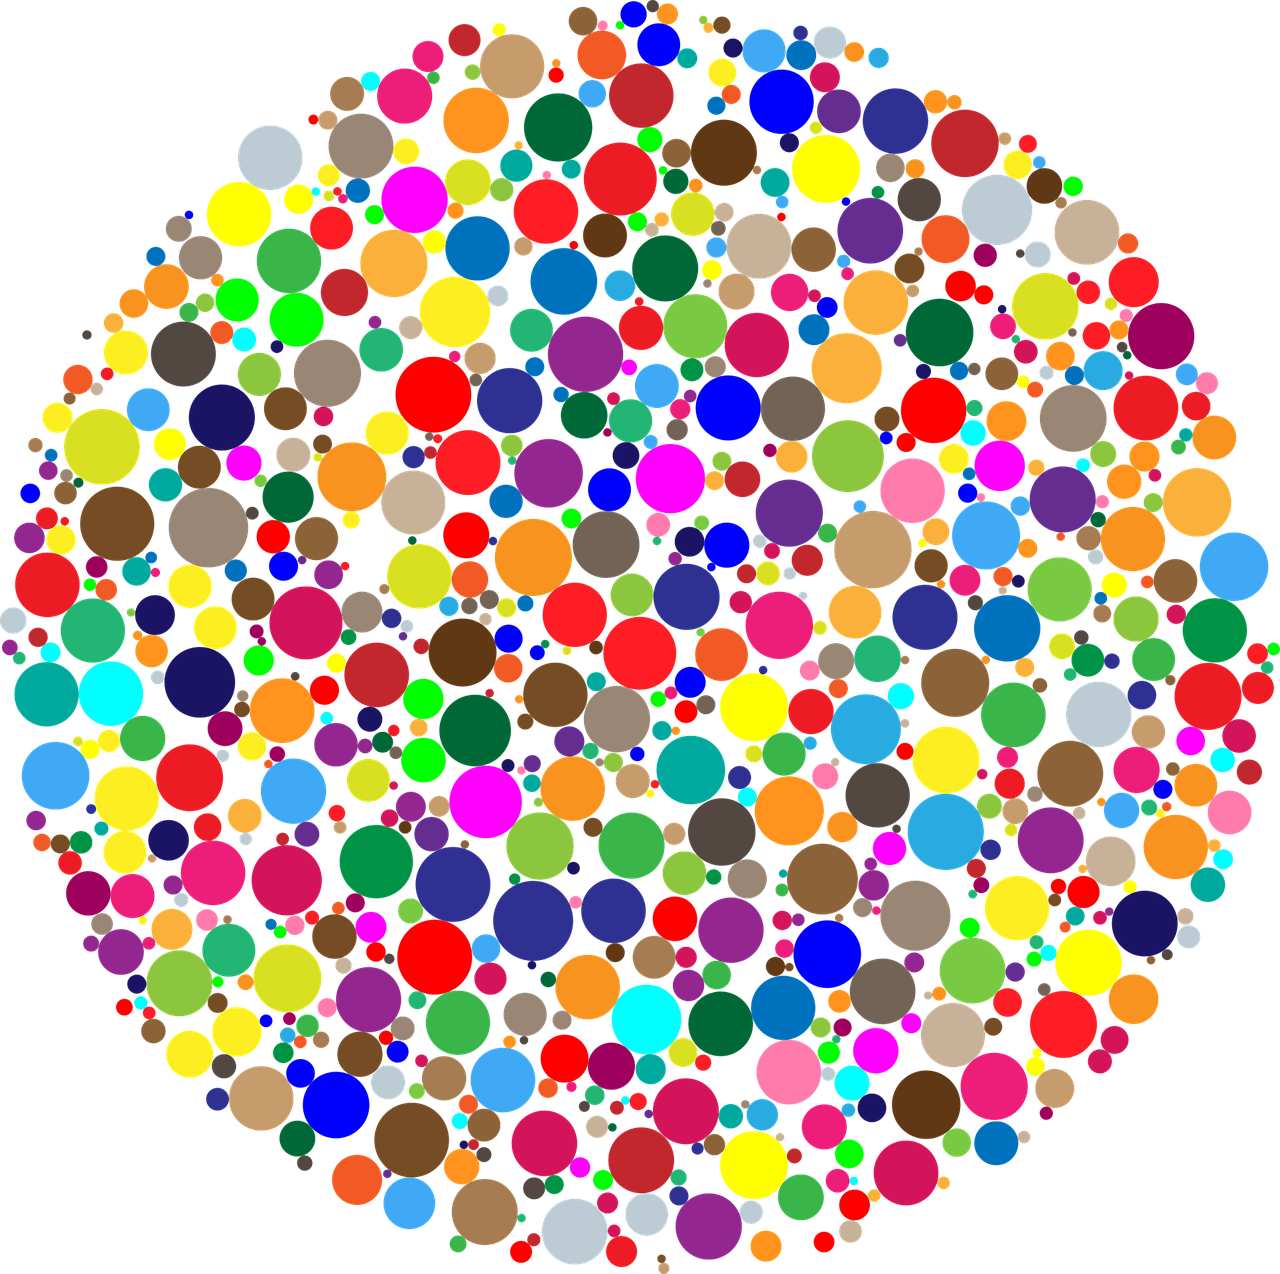 International Dot Day in 2021/2022 - When, Where, Why, How is Celebrated?